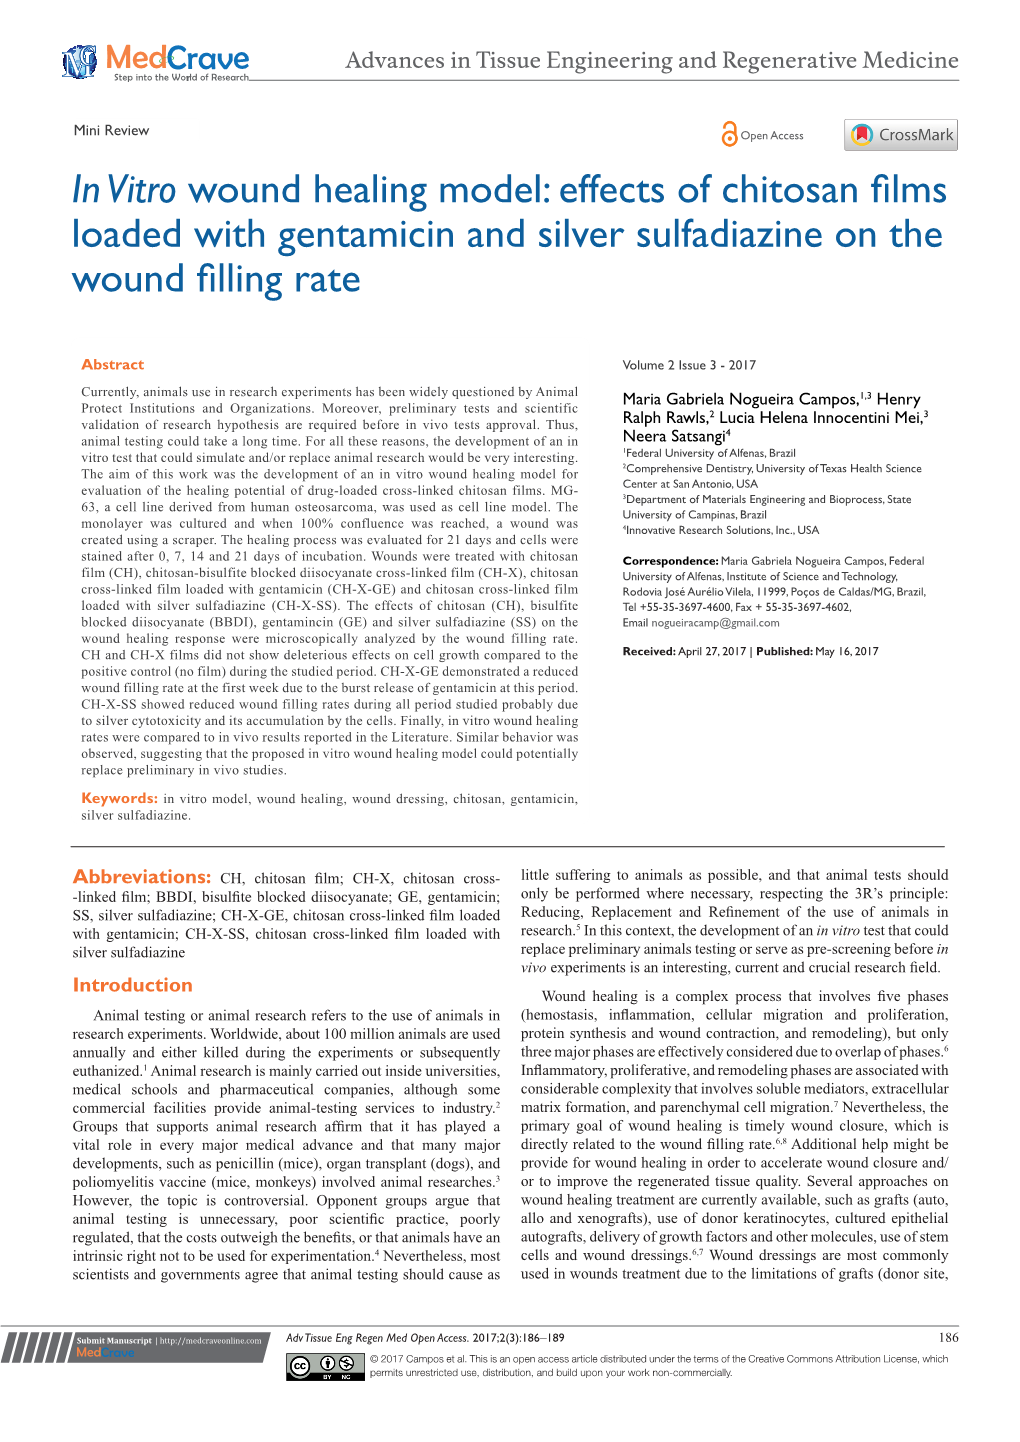 In Vitro Wound Healing Model: Effects of Chitosan Films Loaded with Gentamicin and Silver Sulfadiazine on the Wound Filling Rate